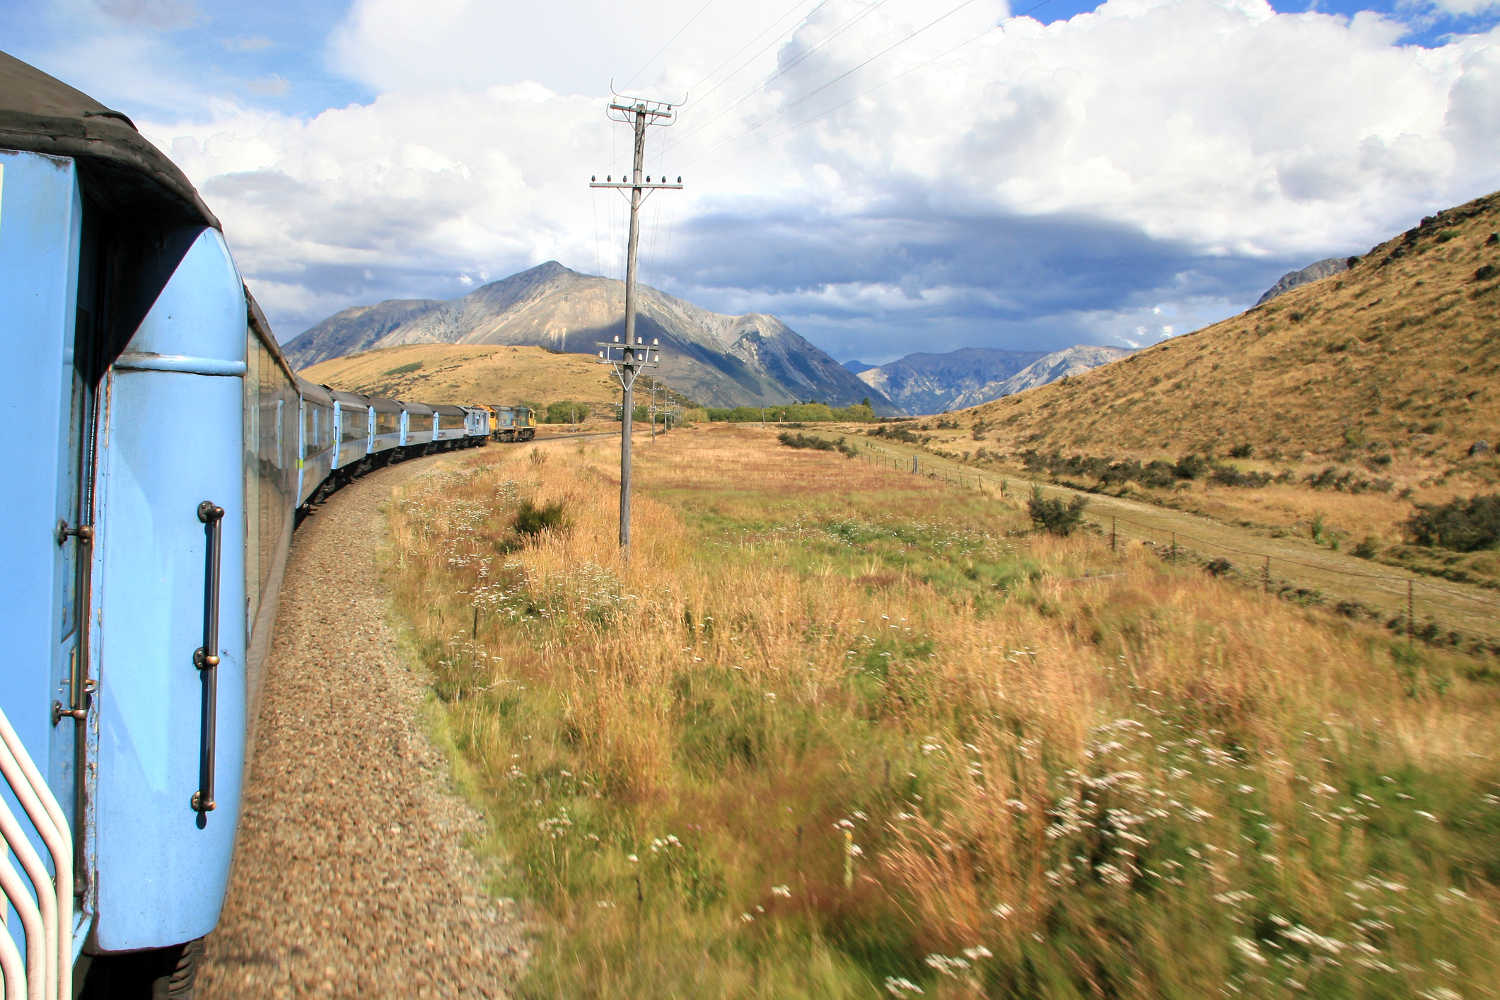 The TranzAlpine Express Train travels through the Southern Alps, Otago, South Island, New Zealand